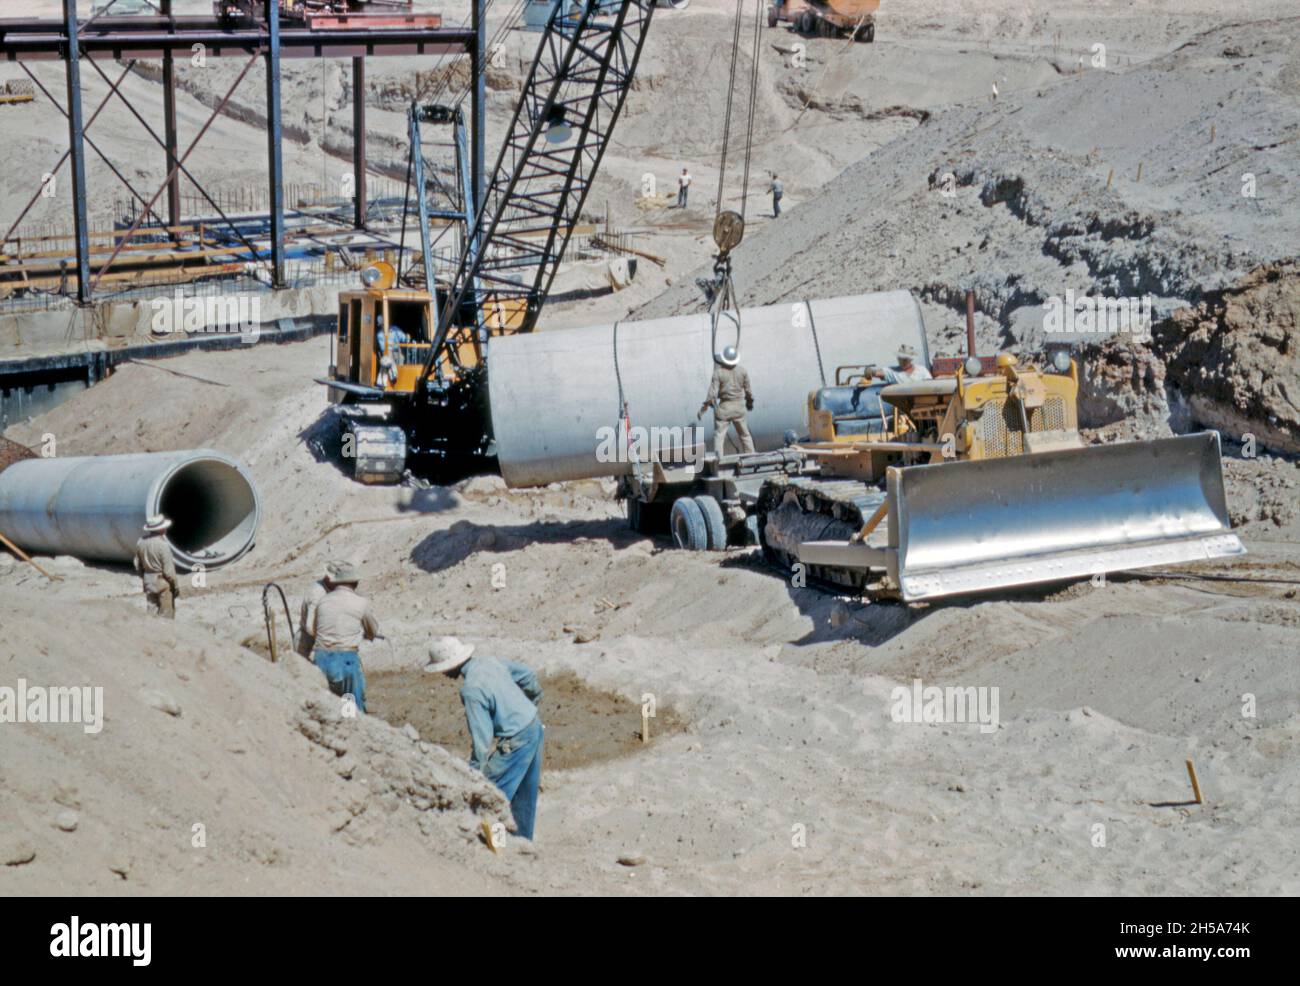 Construction work on the Wellton-Mohawk canal, near Yuma, Arizona, USA in the early 1950s. Here the workers use a crane to lay the concrete pipes that will lift water at one of the pumping stations along the canal. The Wellton-Mohawk Irrigation and Drainage District is located in south-west Arizona, east of Yuma, built between 1949 and 1957. It allows the irrigation in the Lower Gila valley with water from the Colorado river via the Gila Canal to the Wellton-Mohawk Canal, where it is pumped around 160 feet to the headwaters – a vintage 1950s photograph. Stock Photo